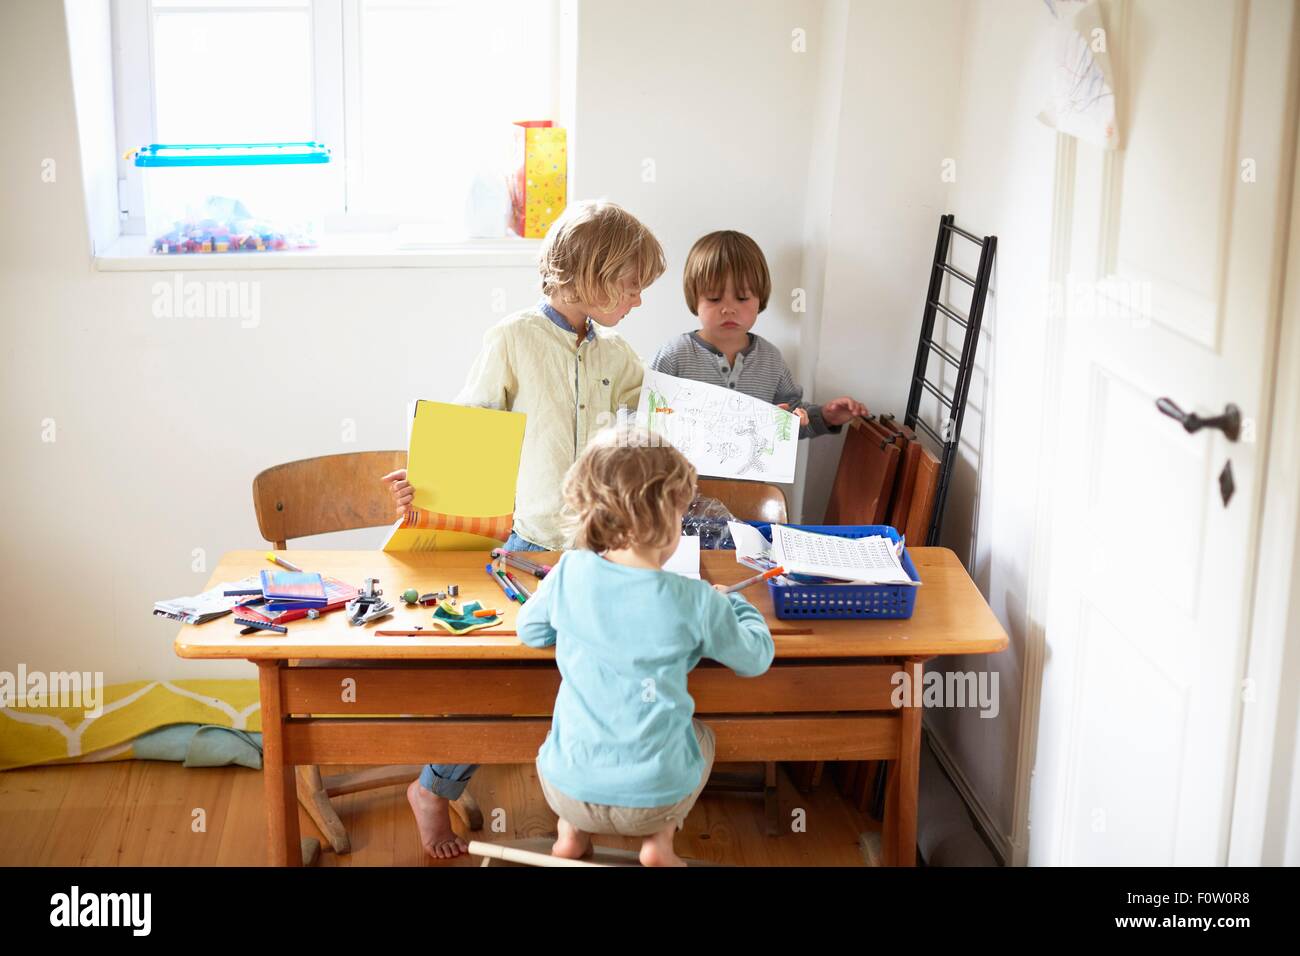 Three boys sitting at table drawing pictures Stock Photo